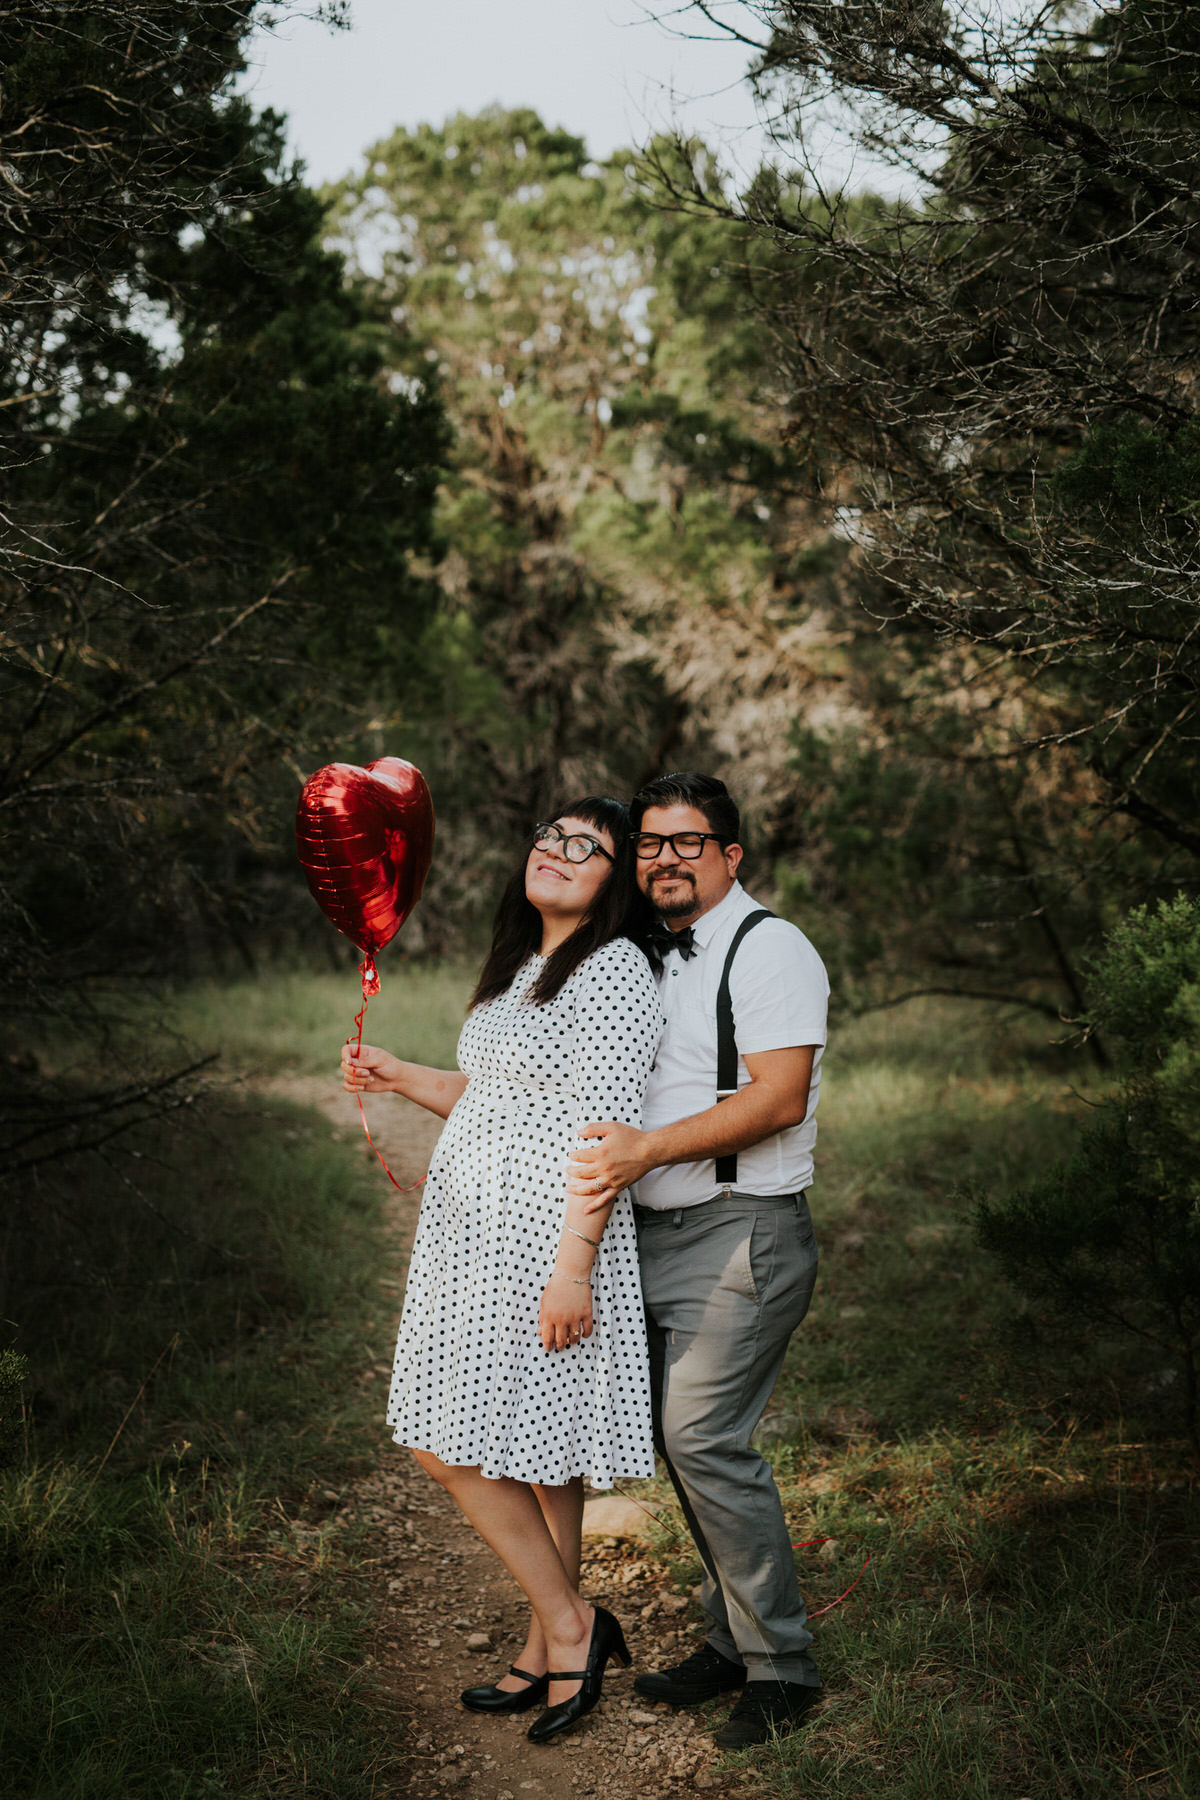 Best Engagement Photography of 2017 - Diana Ascarrunz Photography 8.JPG